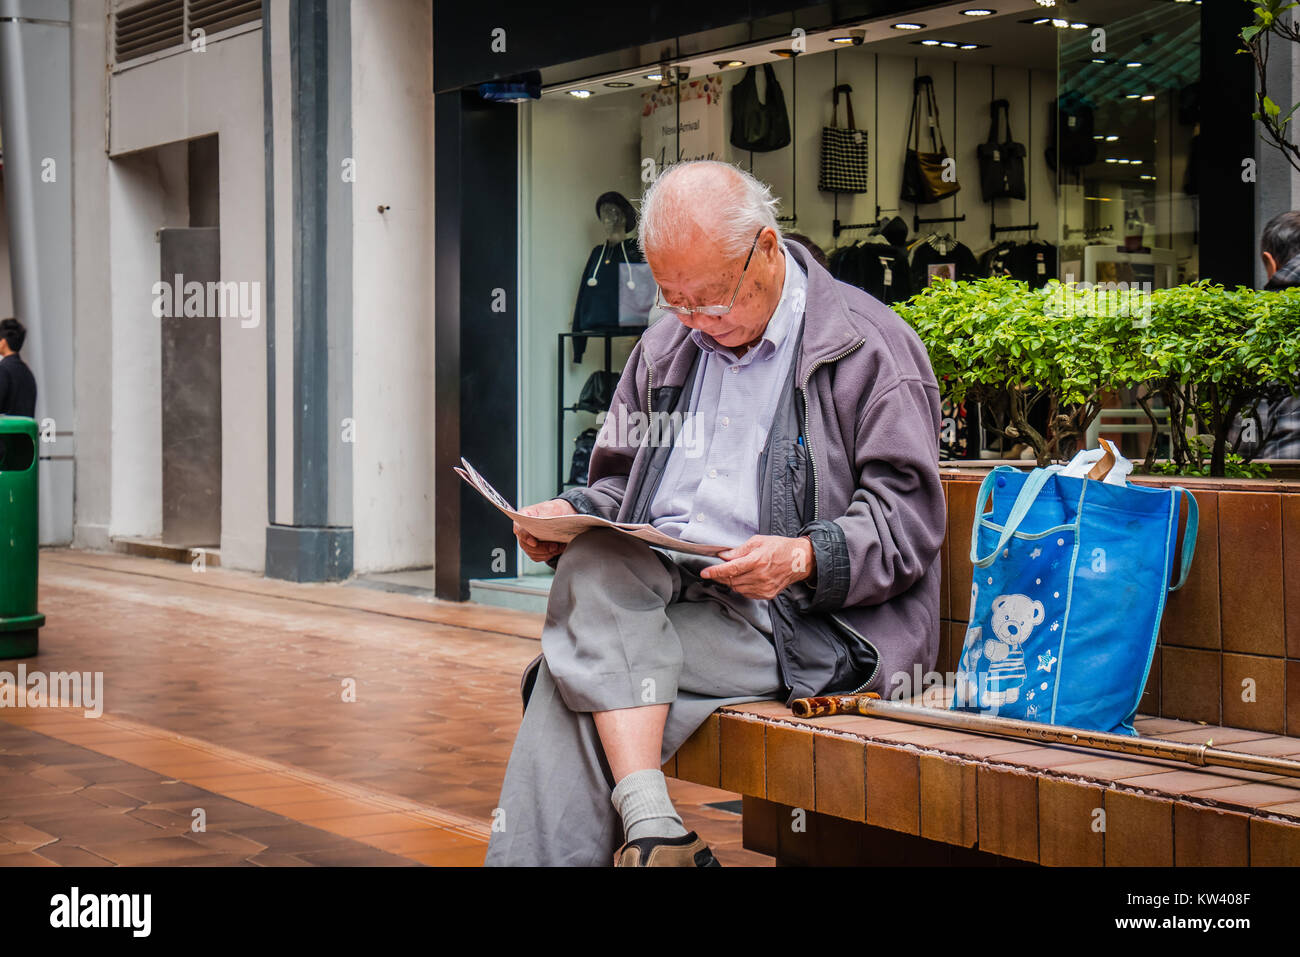 Old chinese man reading newspaper Banque D'Images